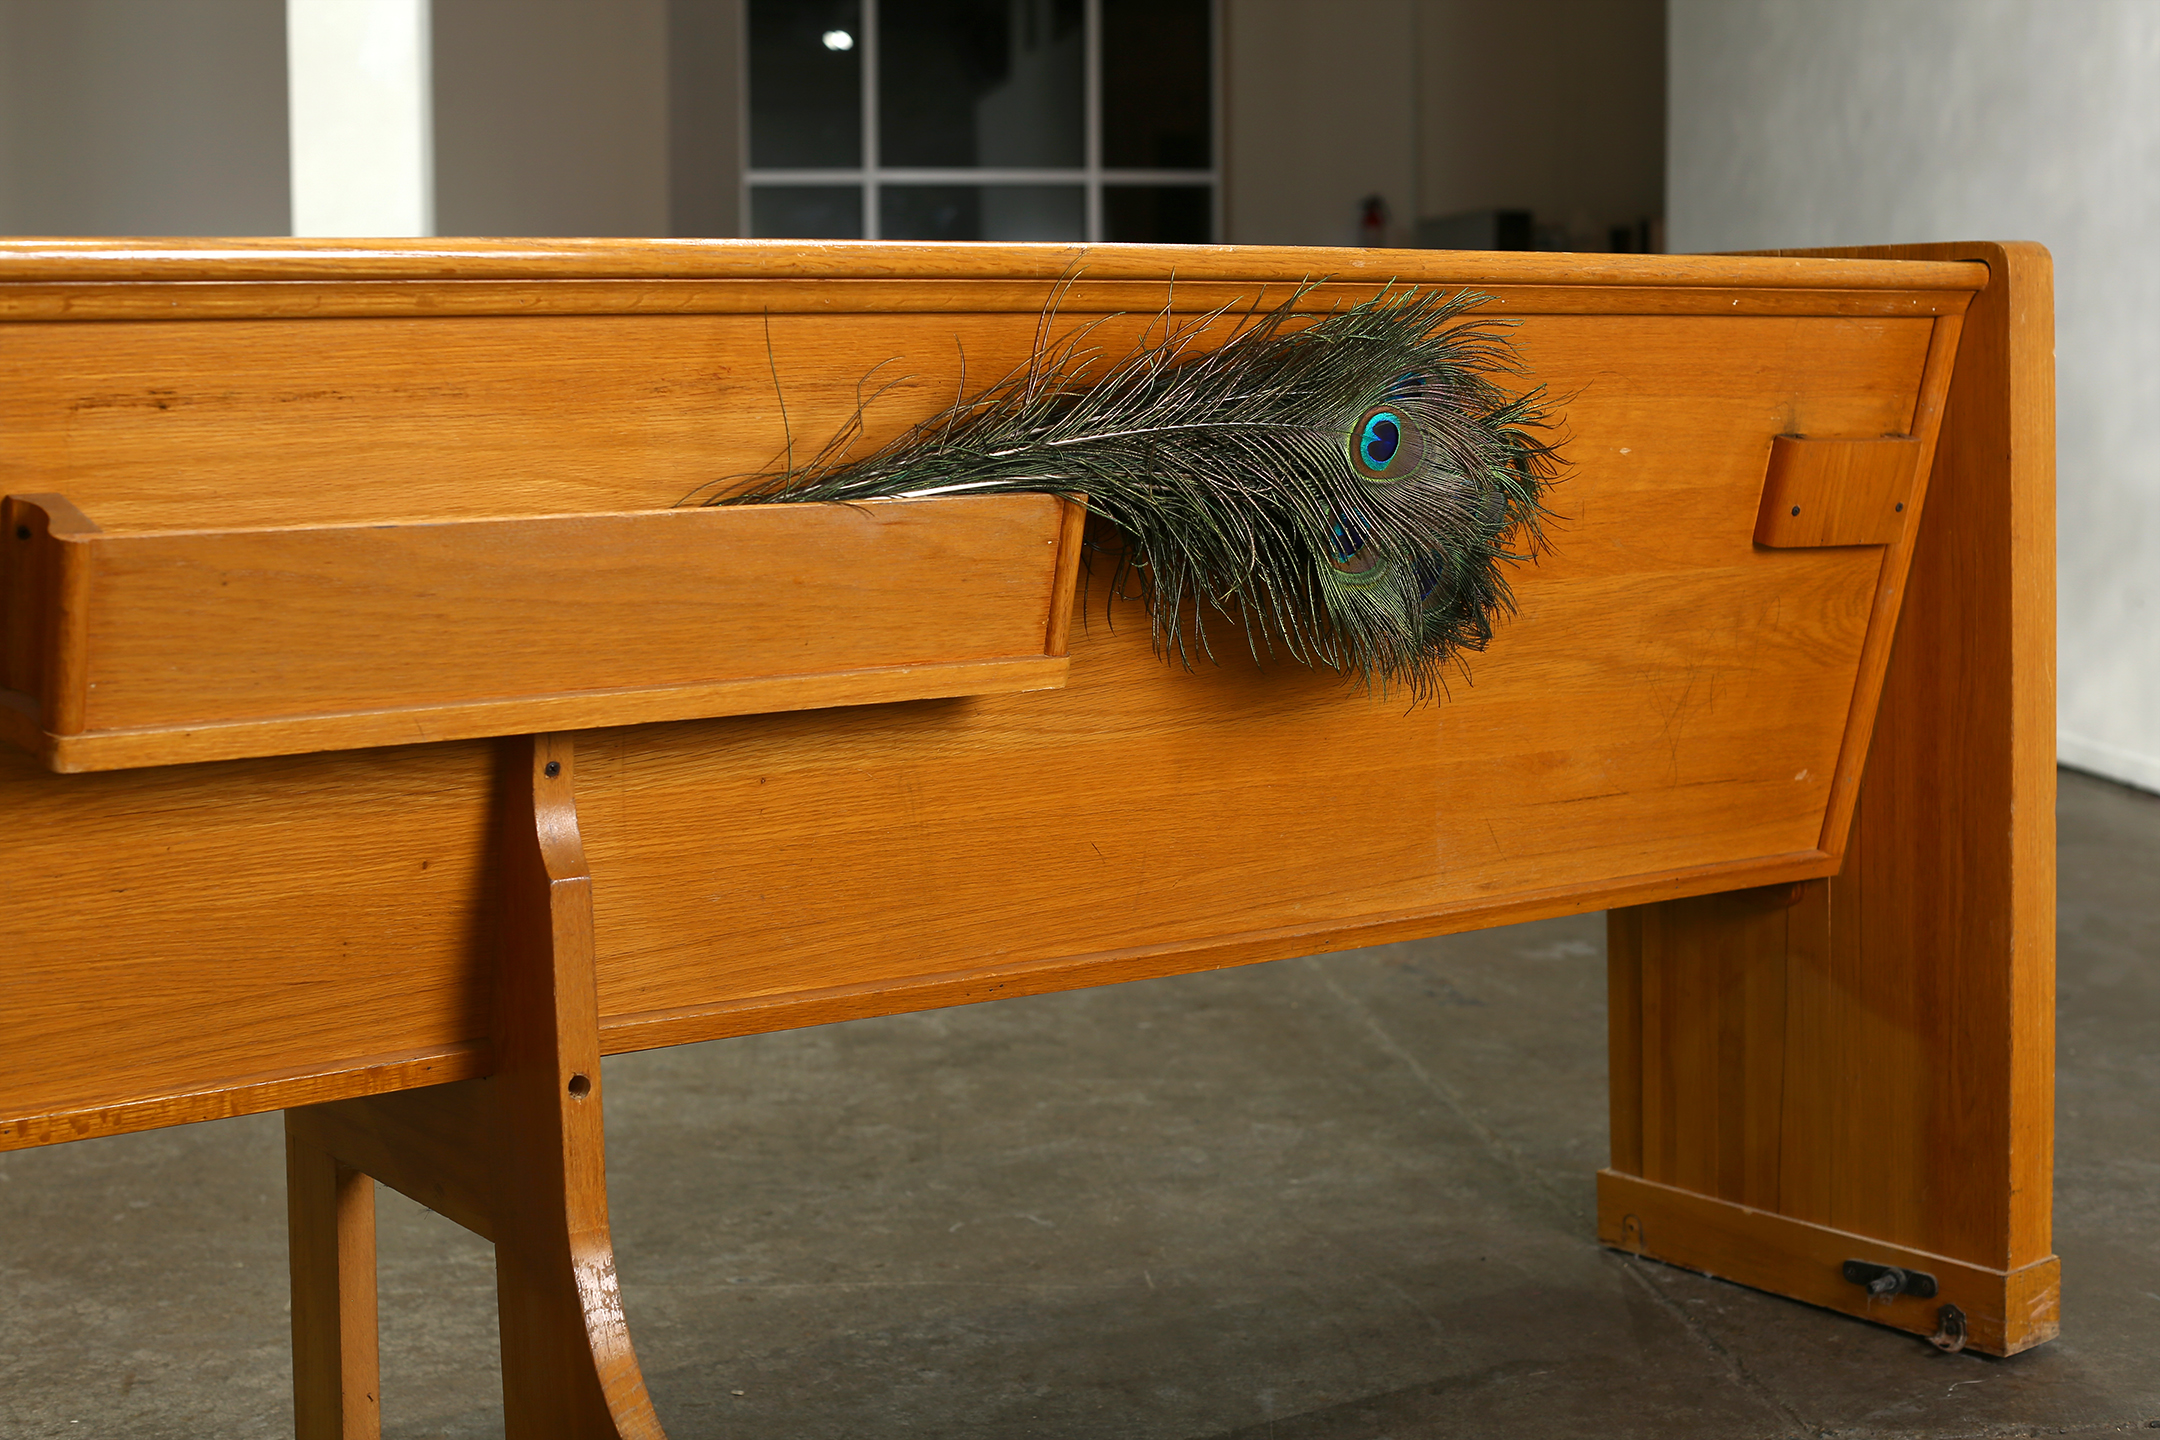   Peace be with you  (reverse side)   1950’s Roman Catholic wood oak church pew, iron ore, peacock feathers 181” x 32” x 21” 2018 